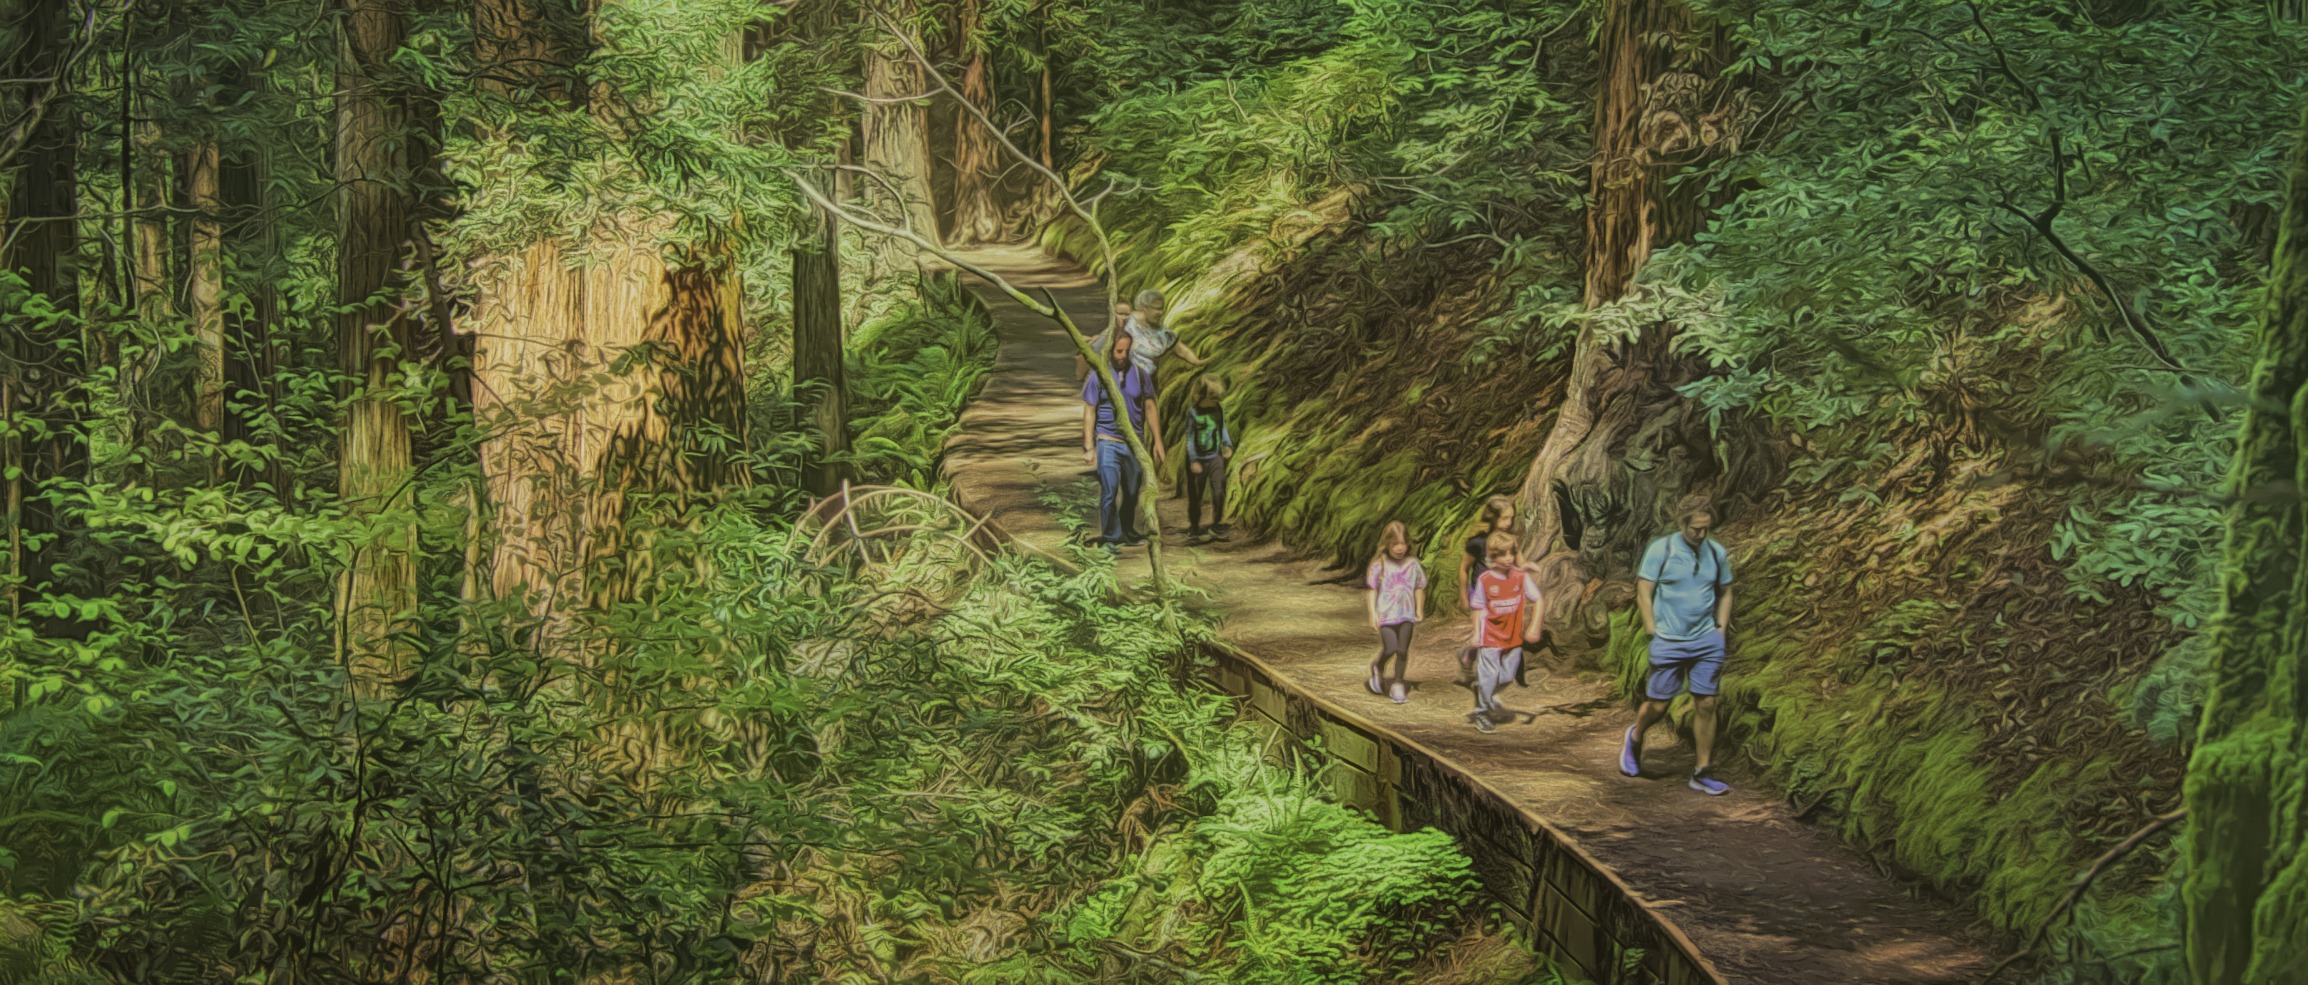 Family walking a trail in Muir Woods National Monument in California